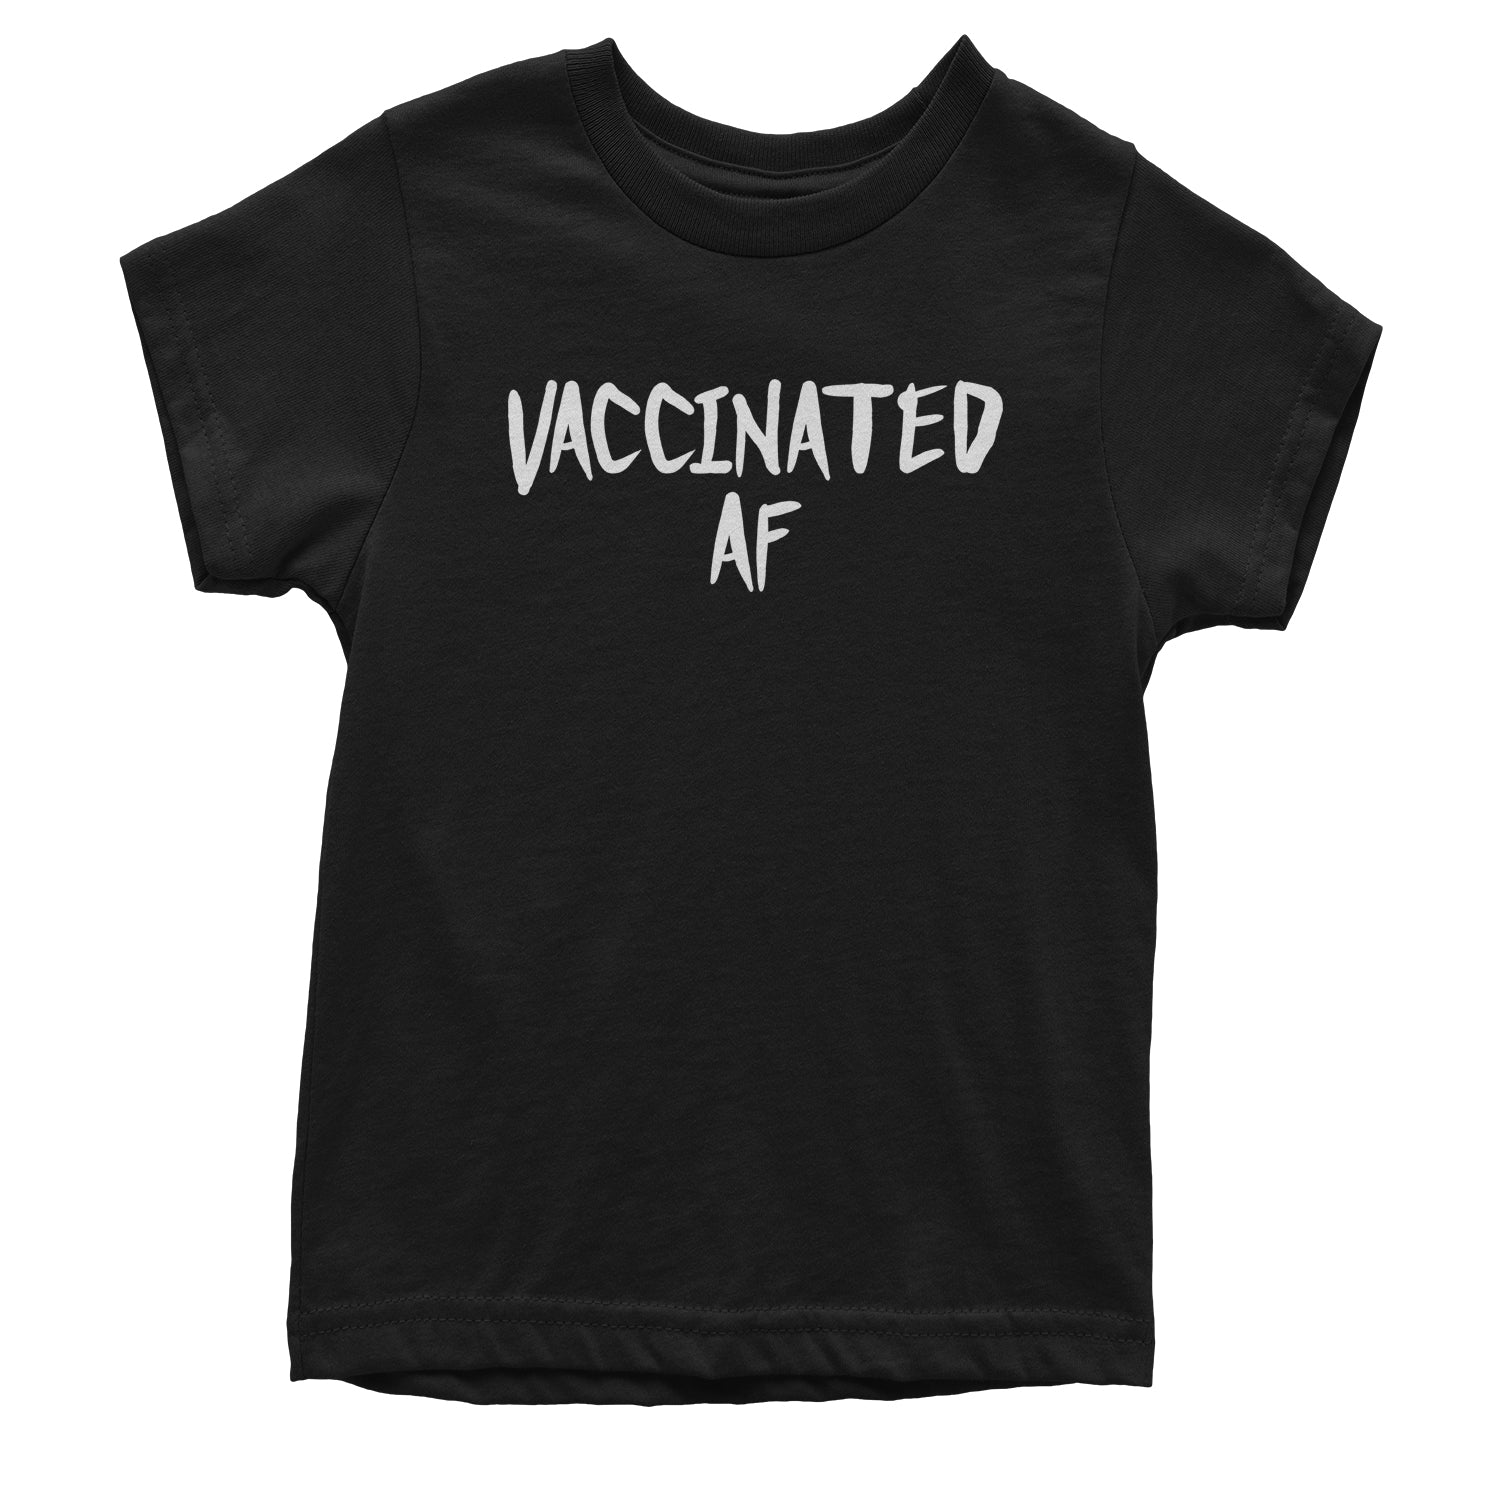 Vaccinated AF Pro Vaccine Funny Vaccination Health Youth T-shirt moderna, pfizer, vaccine, vax, vaxx by Expression Tees